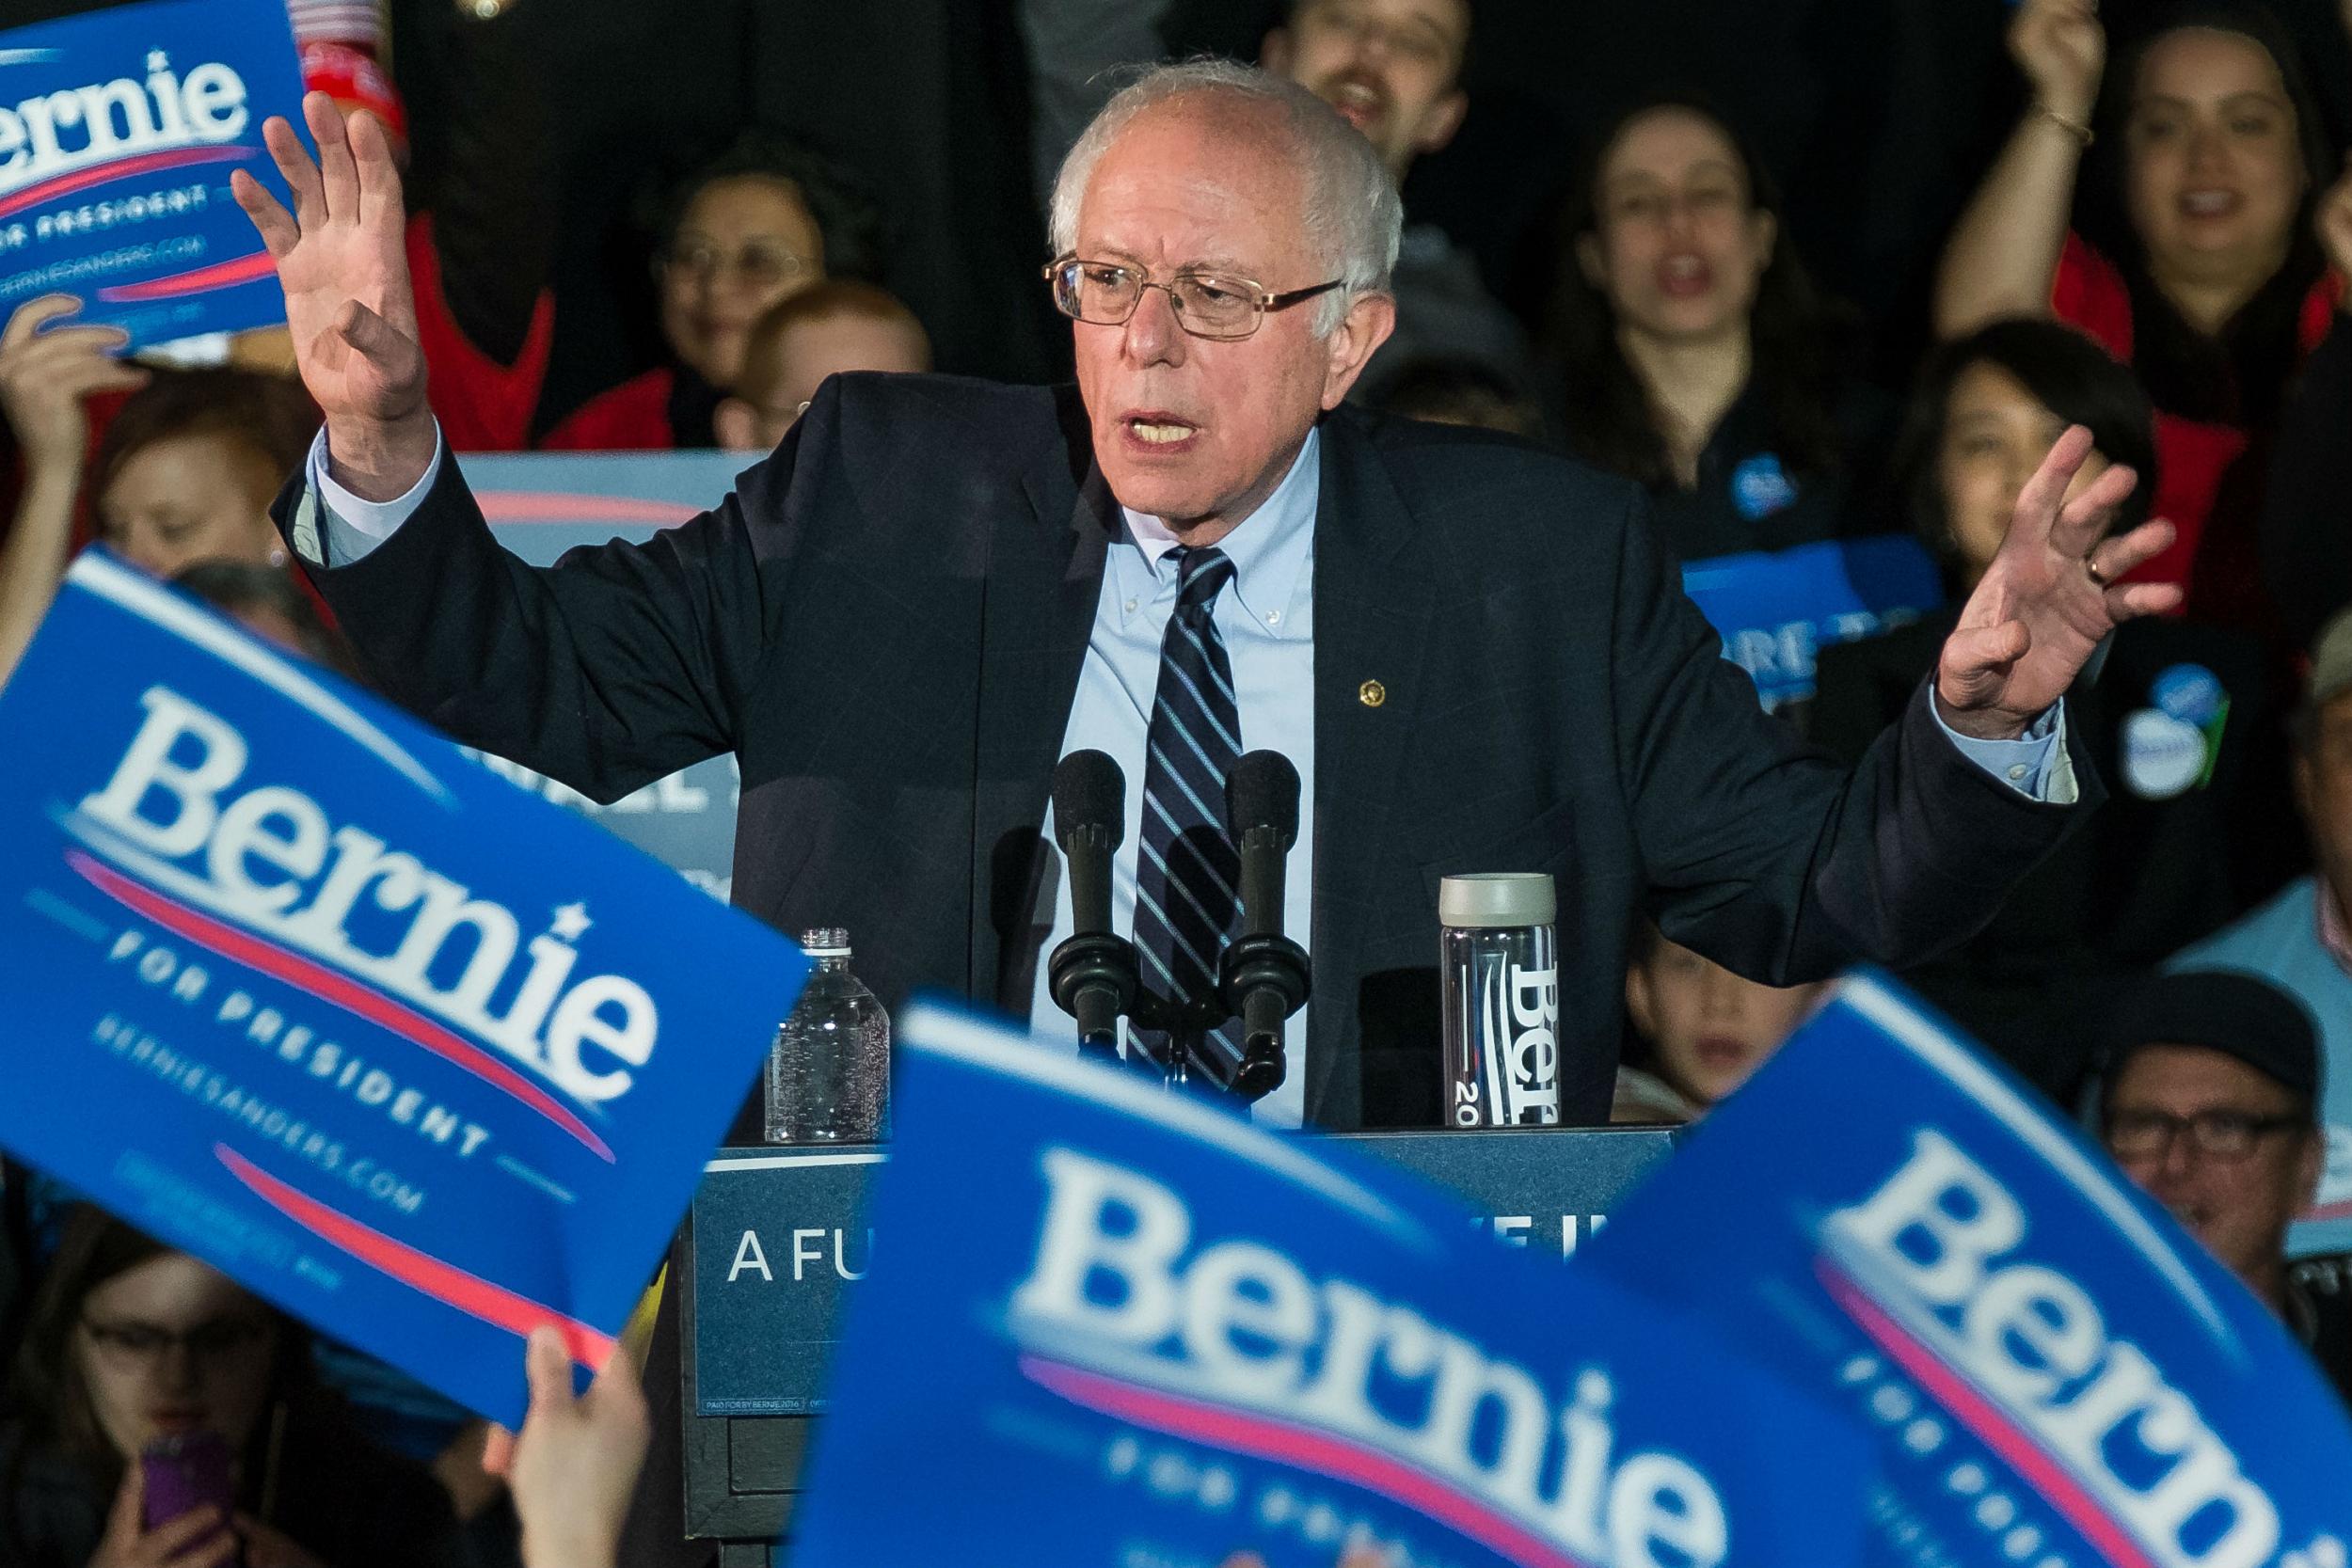 Bernie Sanders has laid out a left wing agenda not seen for decades